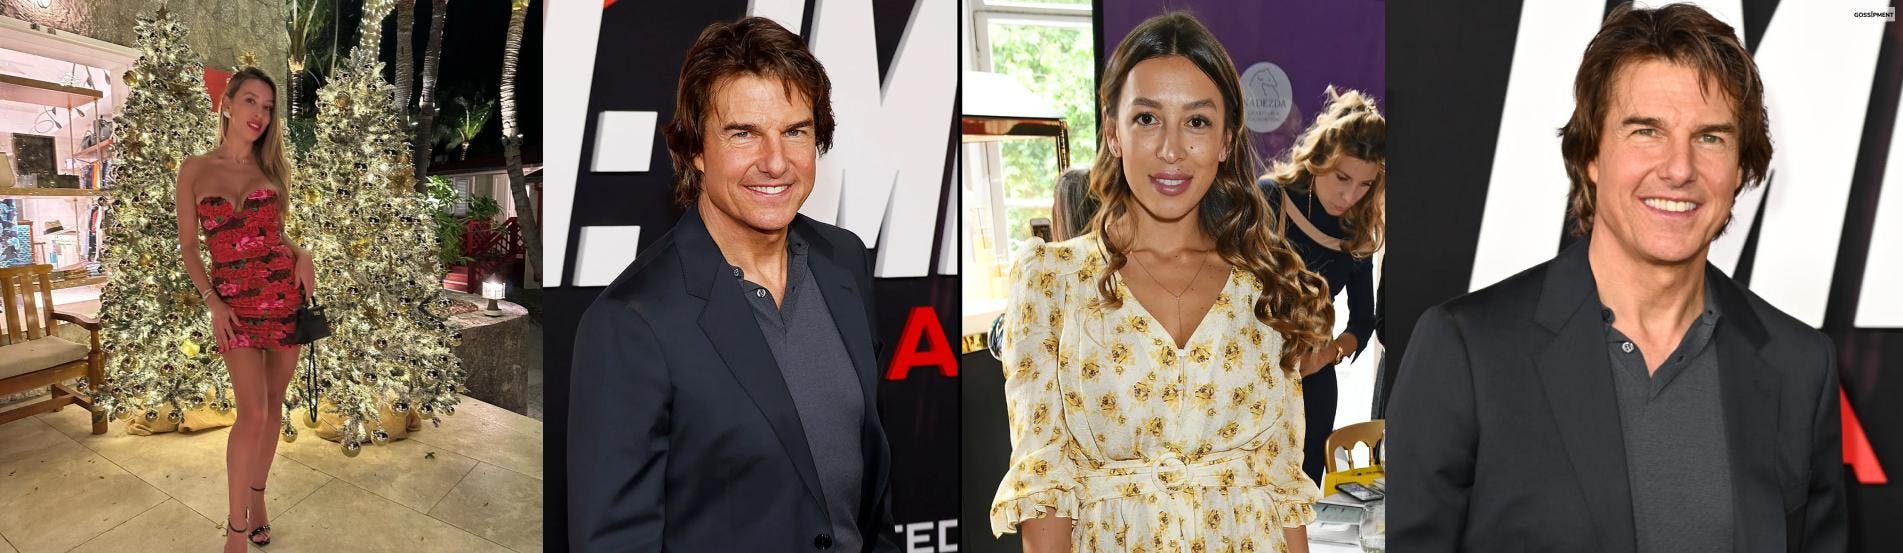 Cover Image for Tom Cruise Is Feeling Very Confident About His New Relationship With Elsina Khayrova